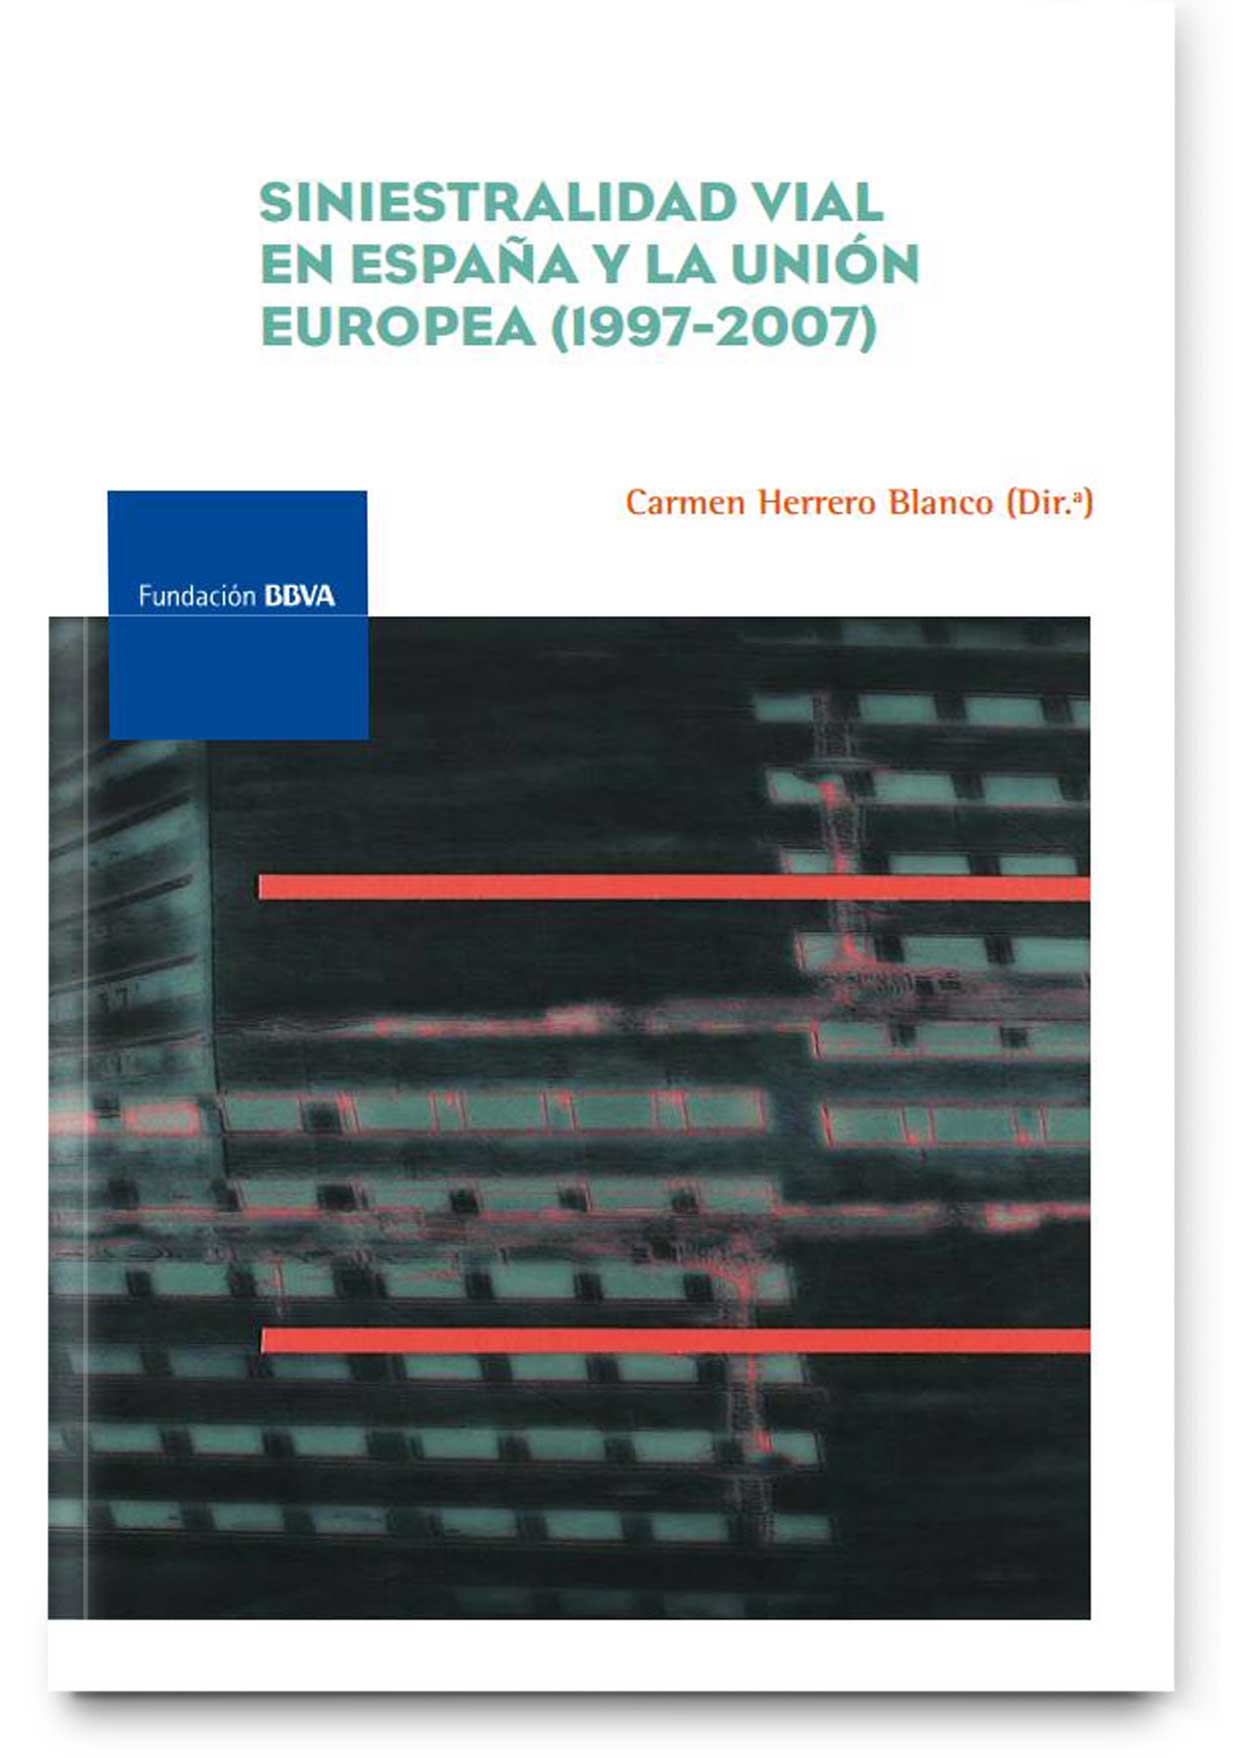 Road Accidents in Spain and in the European Union, 1997-2007